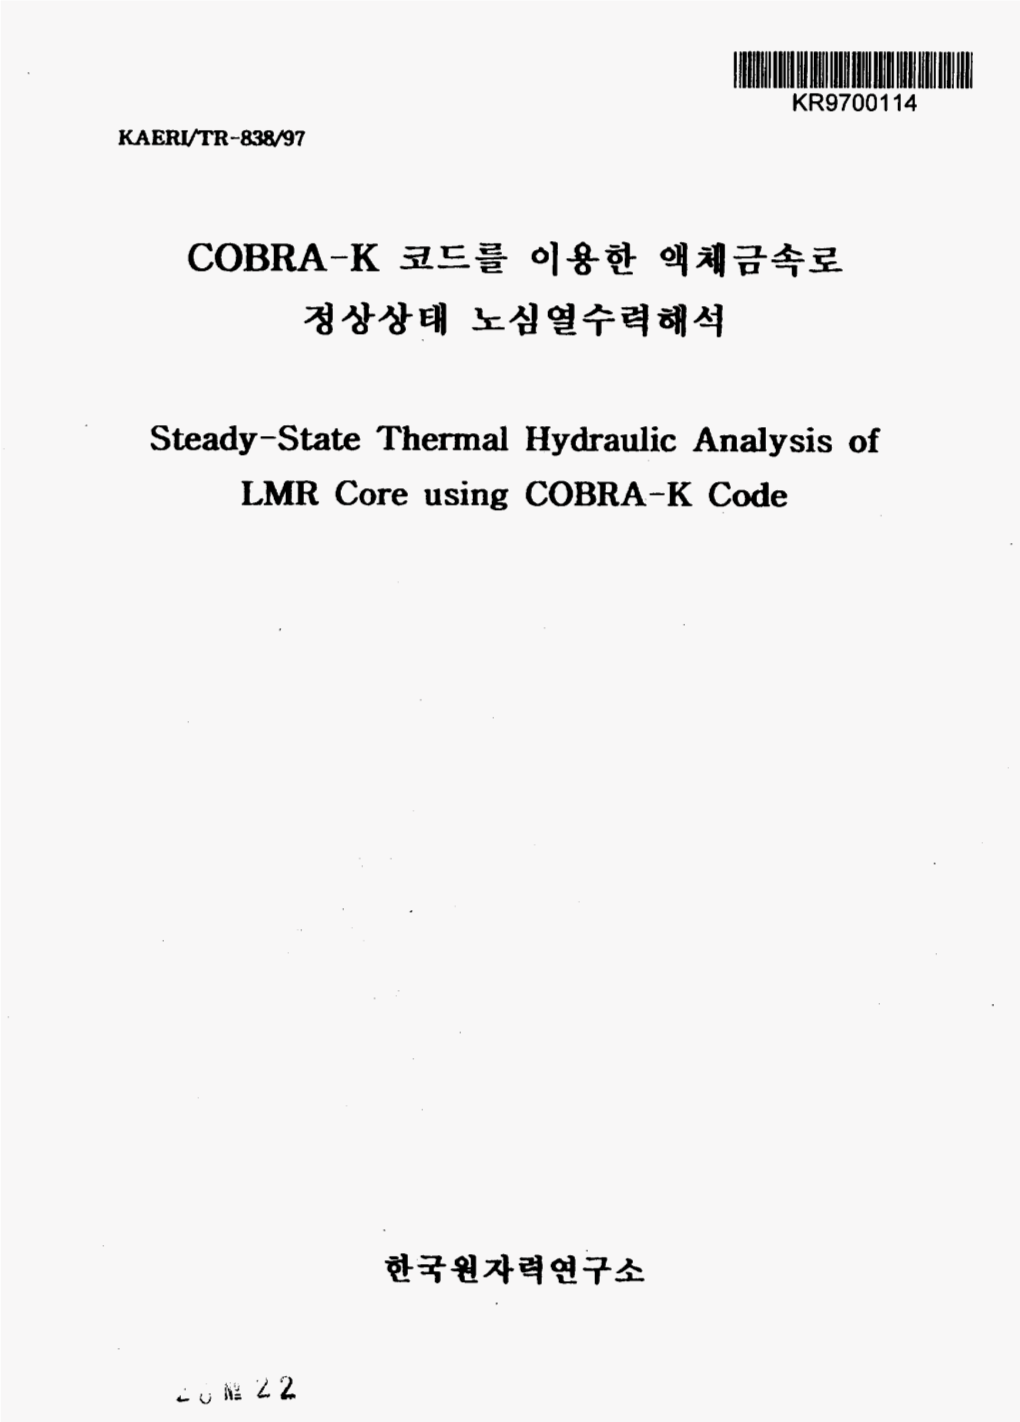 Steady State Thermal Hydraulic Analysis of LMR Core Using COBRA